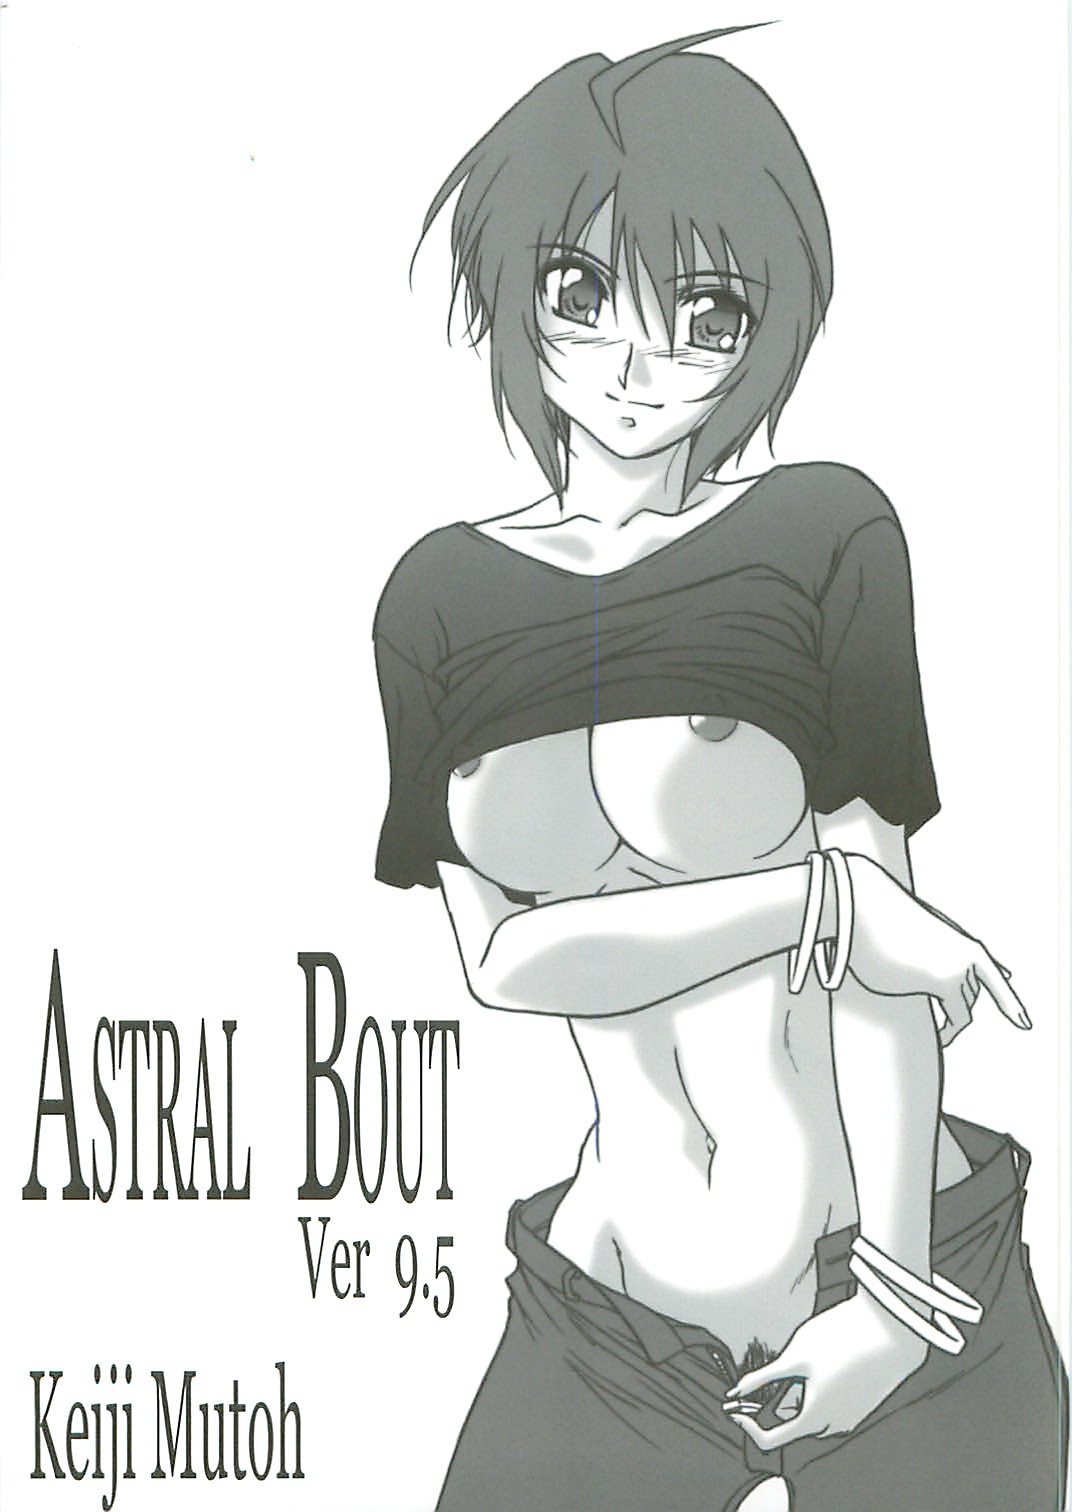 (C68) [STUDIO TRIUMPH (Mutou Keiji)] AstralBout Ver 9.5 (Mobile Suit Gundam SEED) page 1 full